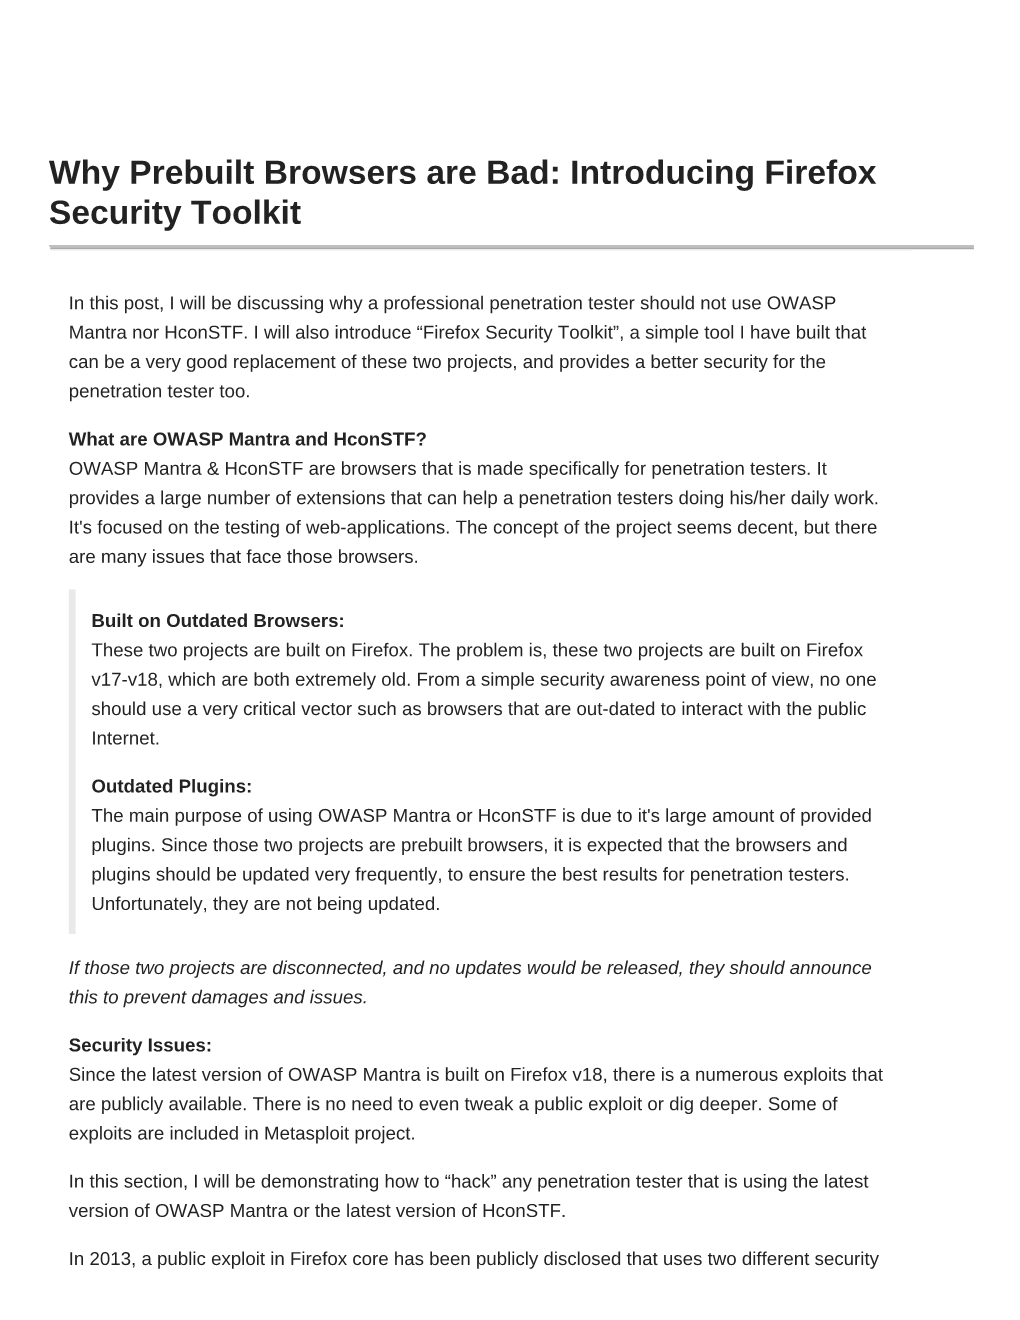 Why Prebuilt Browsers Are Bad: Introducing Firefox Security Toolkit